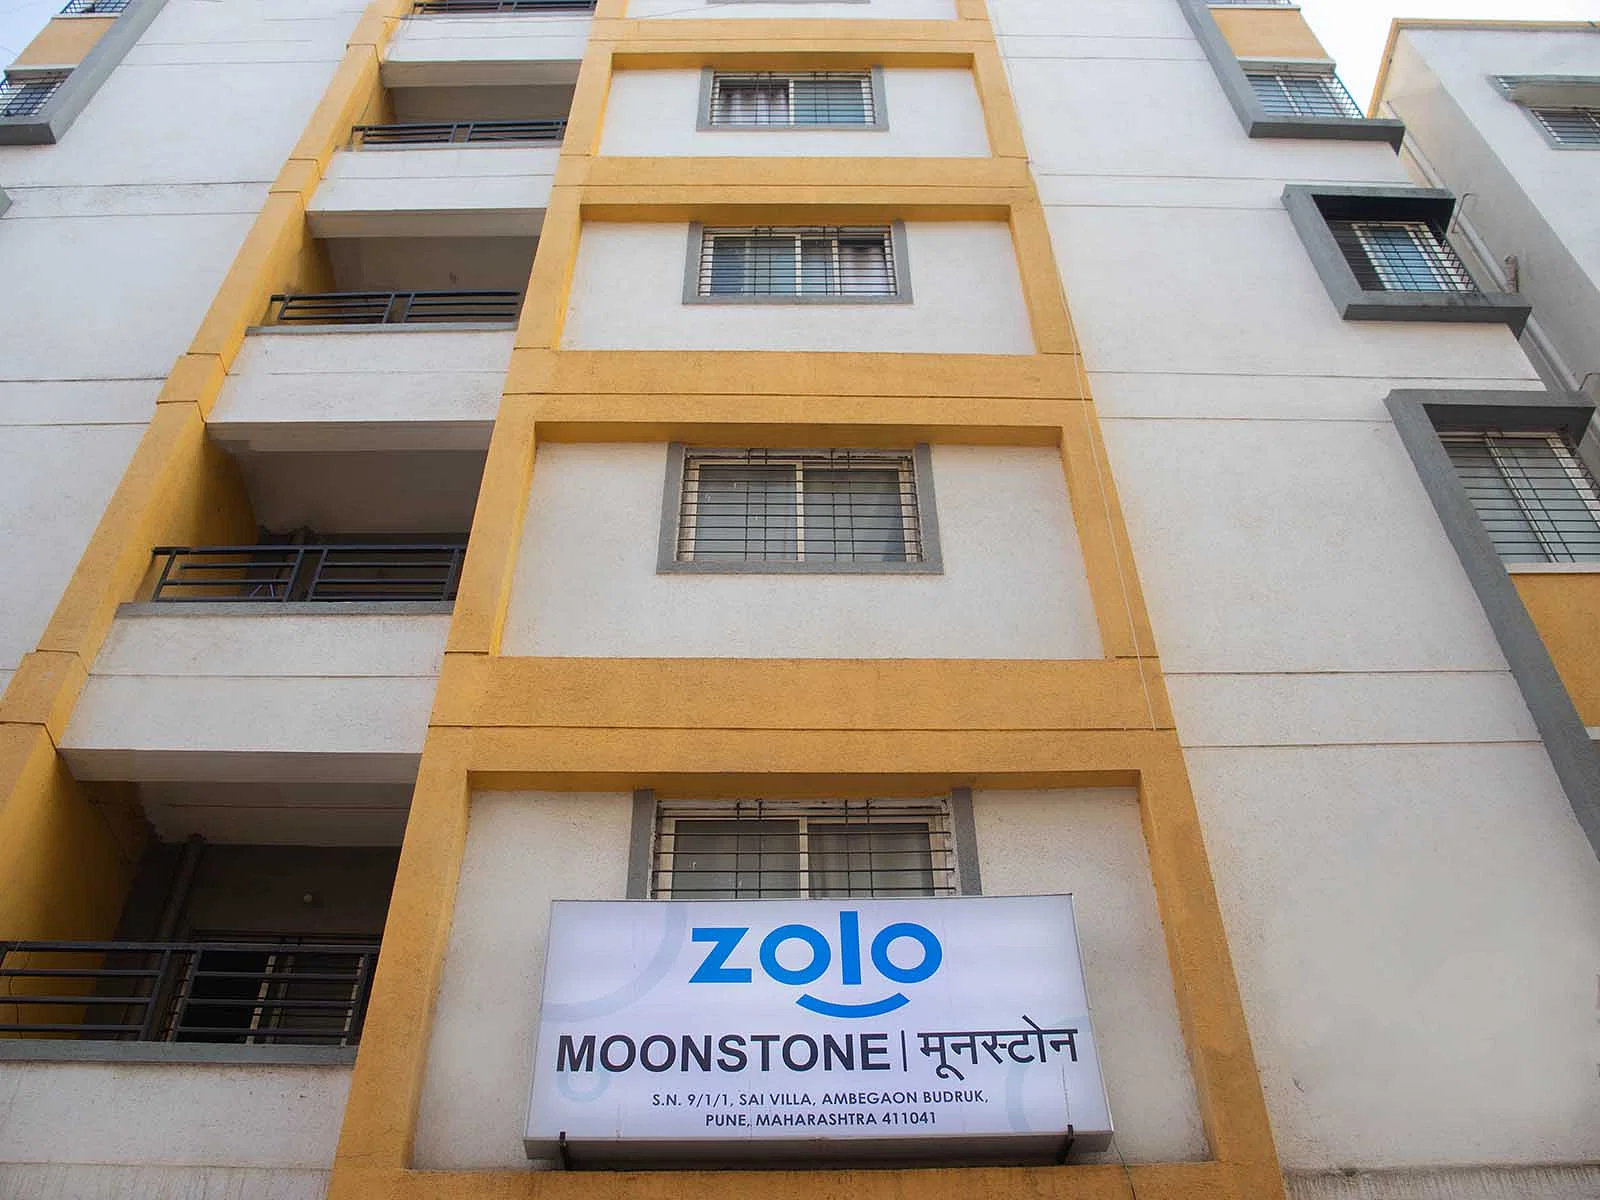 safe and affordable hostels for women students with 24/7 security and CCTV surveillance-Zolo Moonstone